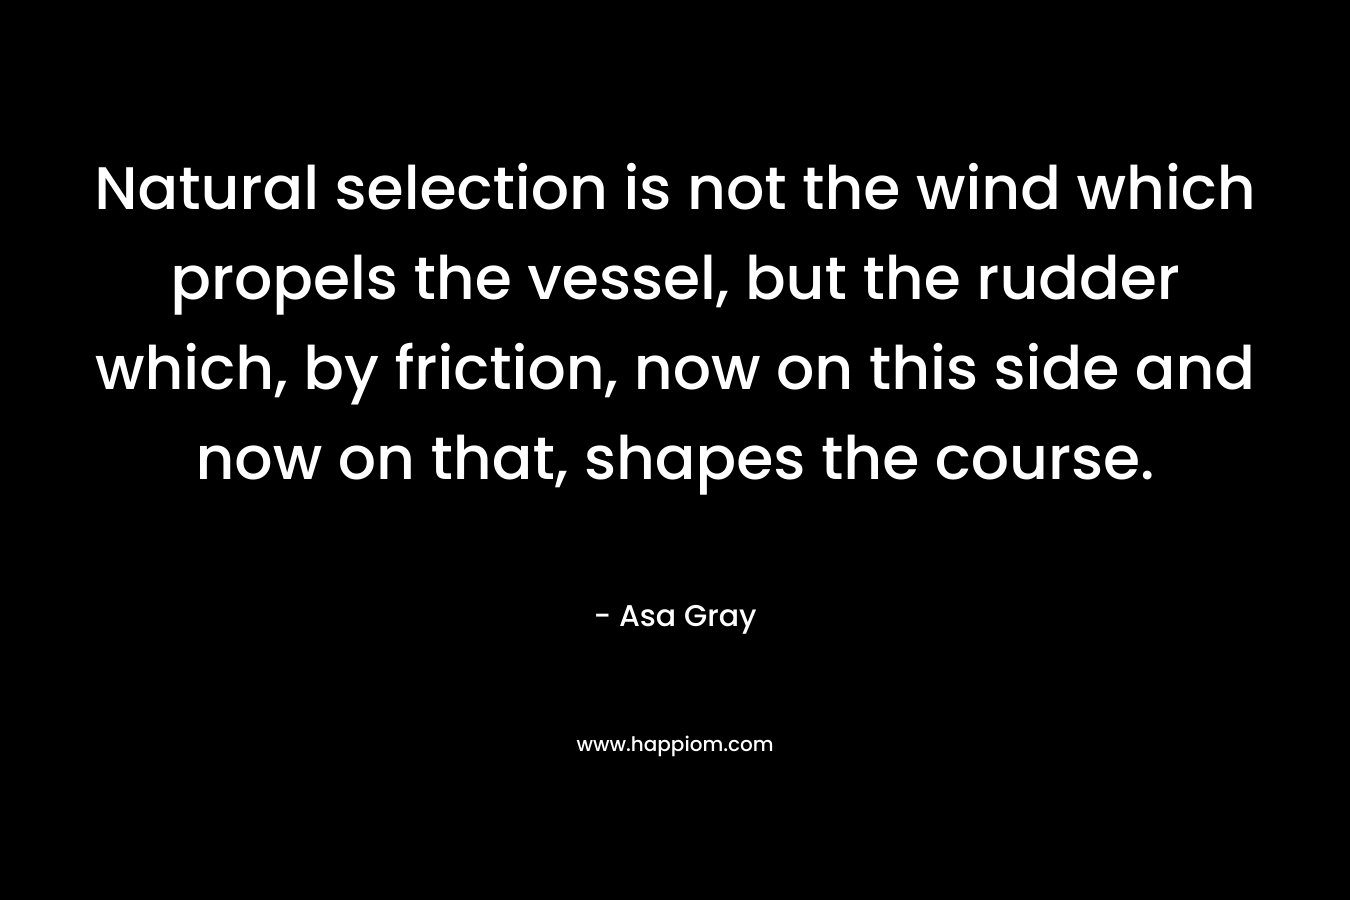 Natural selection is not the wind which propels the vessel, but the rudder which, by friction, now on this side and now on that, shapes the course.